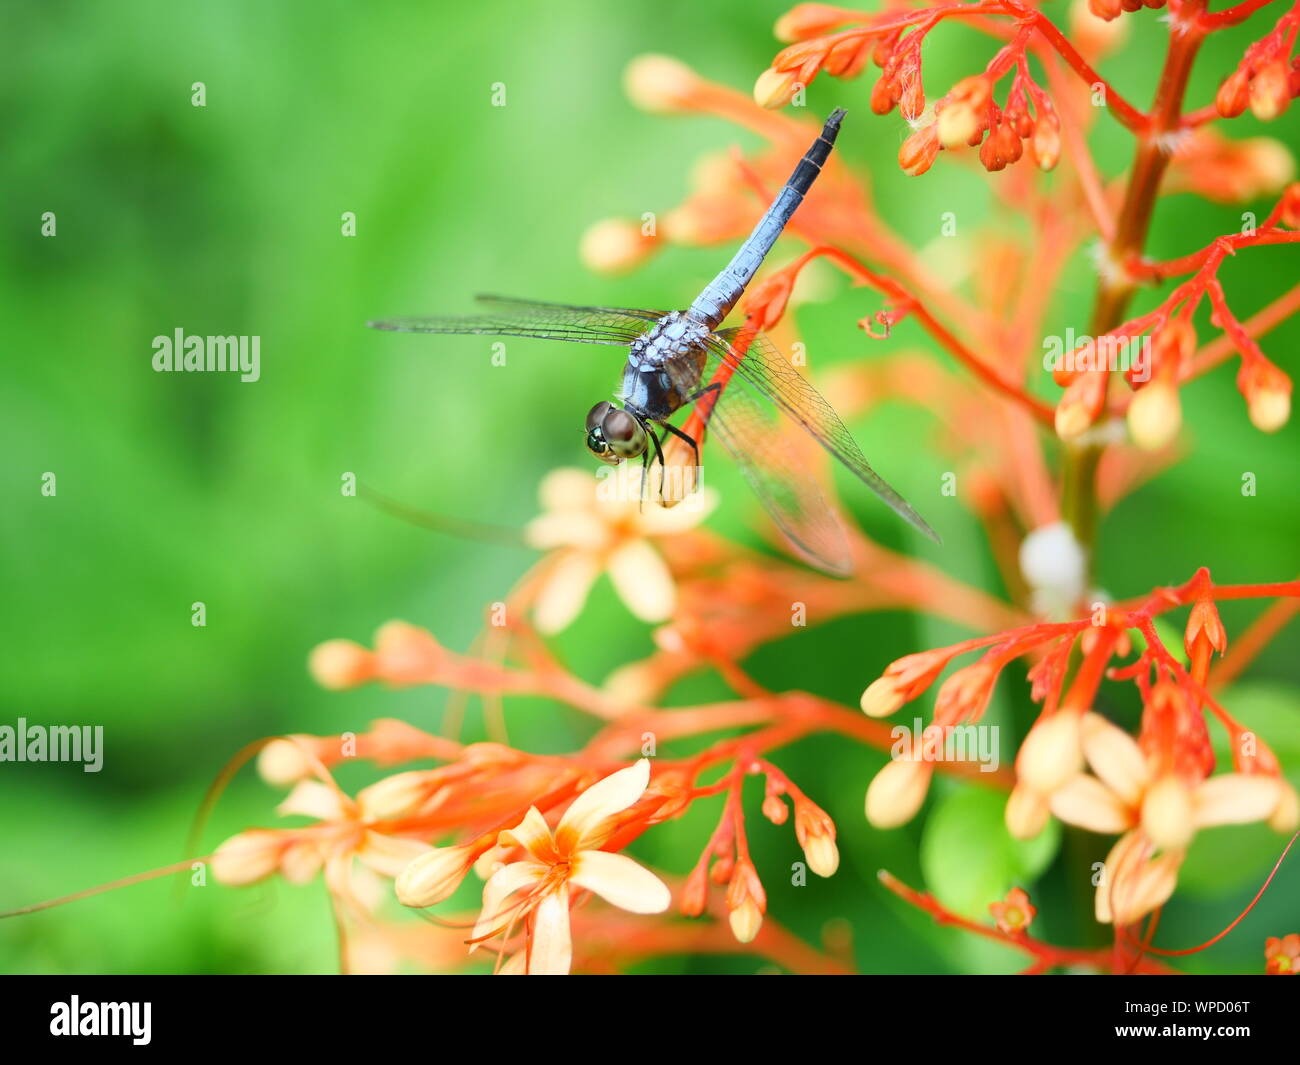 Blue dasher dragonfly with pattern of yellow and orange on the side of the body, Predator insects with transparent wing on red ixora pavetta blossom Stock Photo